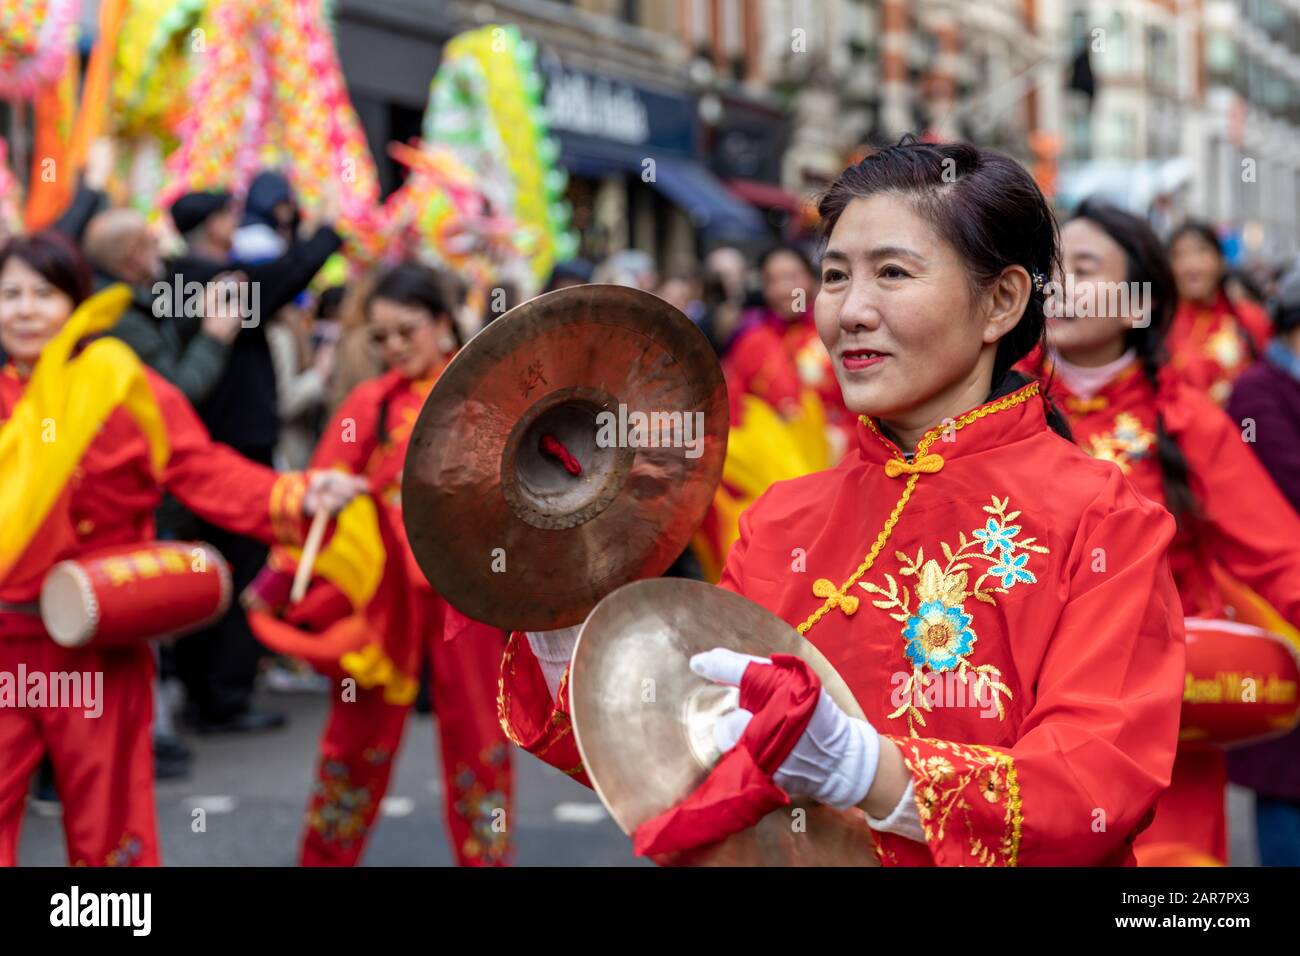 Annual Chinese New Year Parade in London, bringing in the year of the Rat. Stock Photo